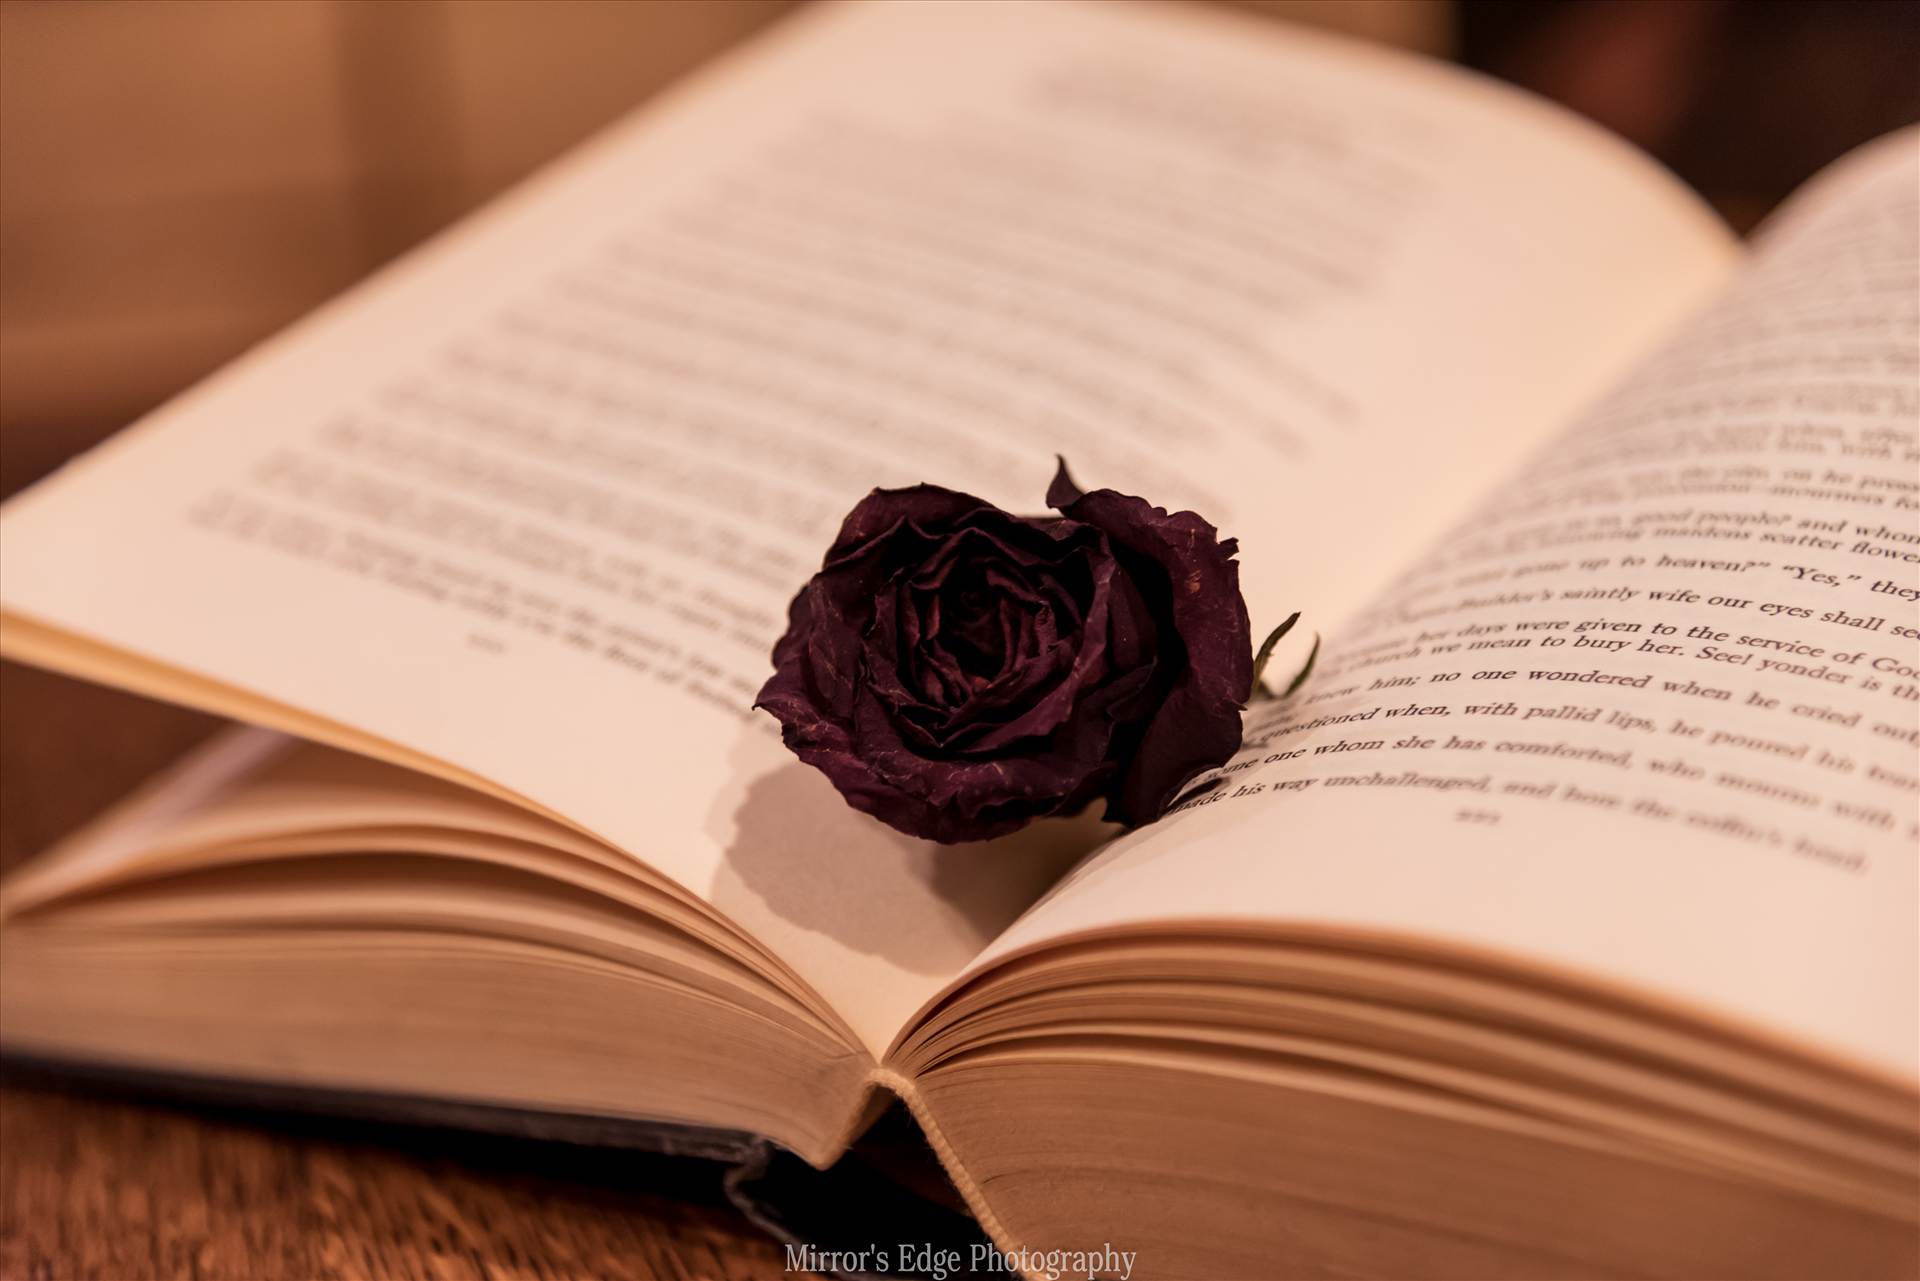 Black Rose in a Book.jpg - undefined by Sarah Williams